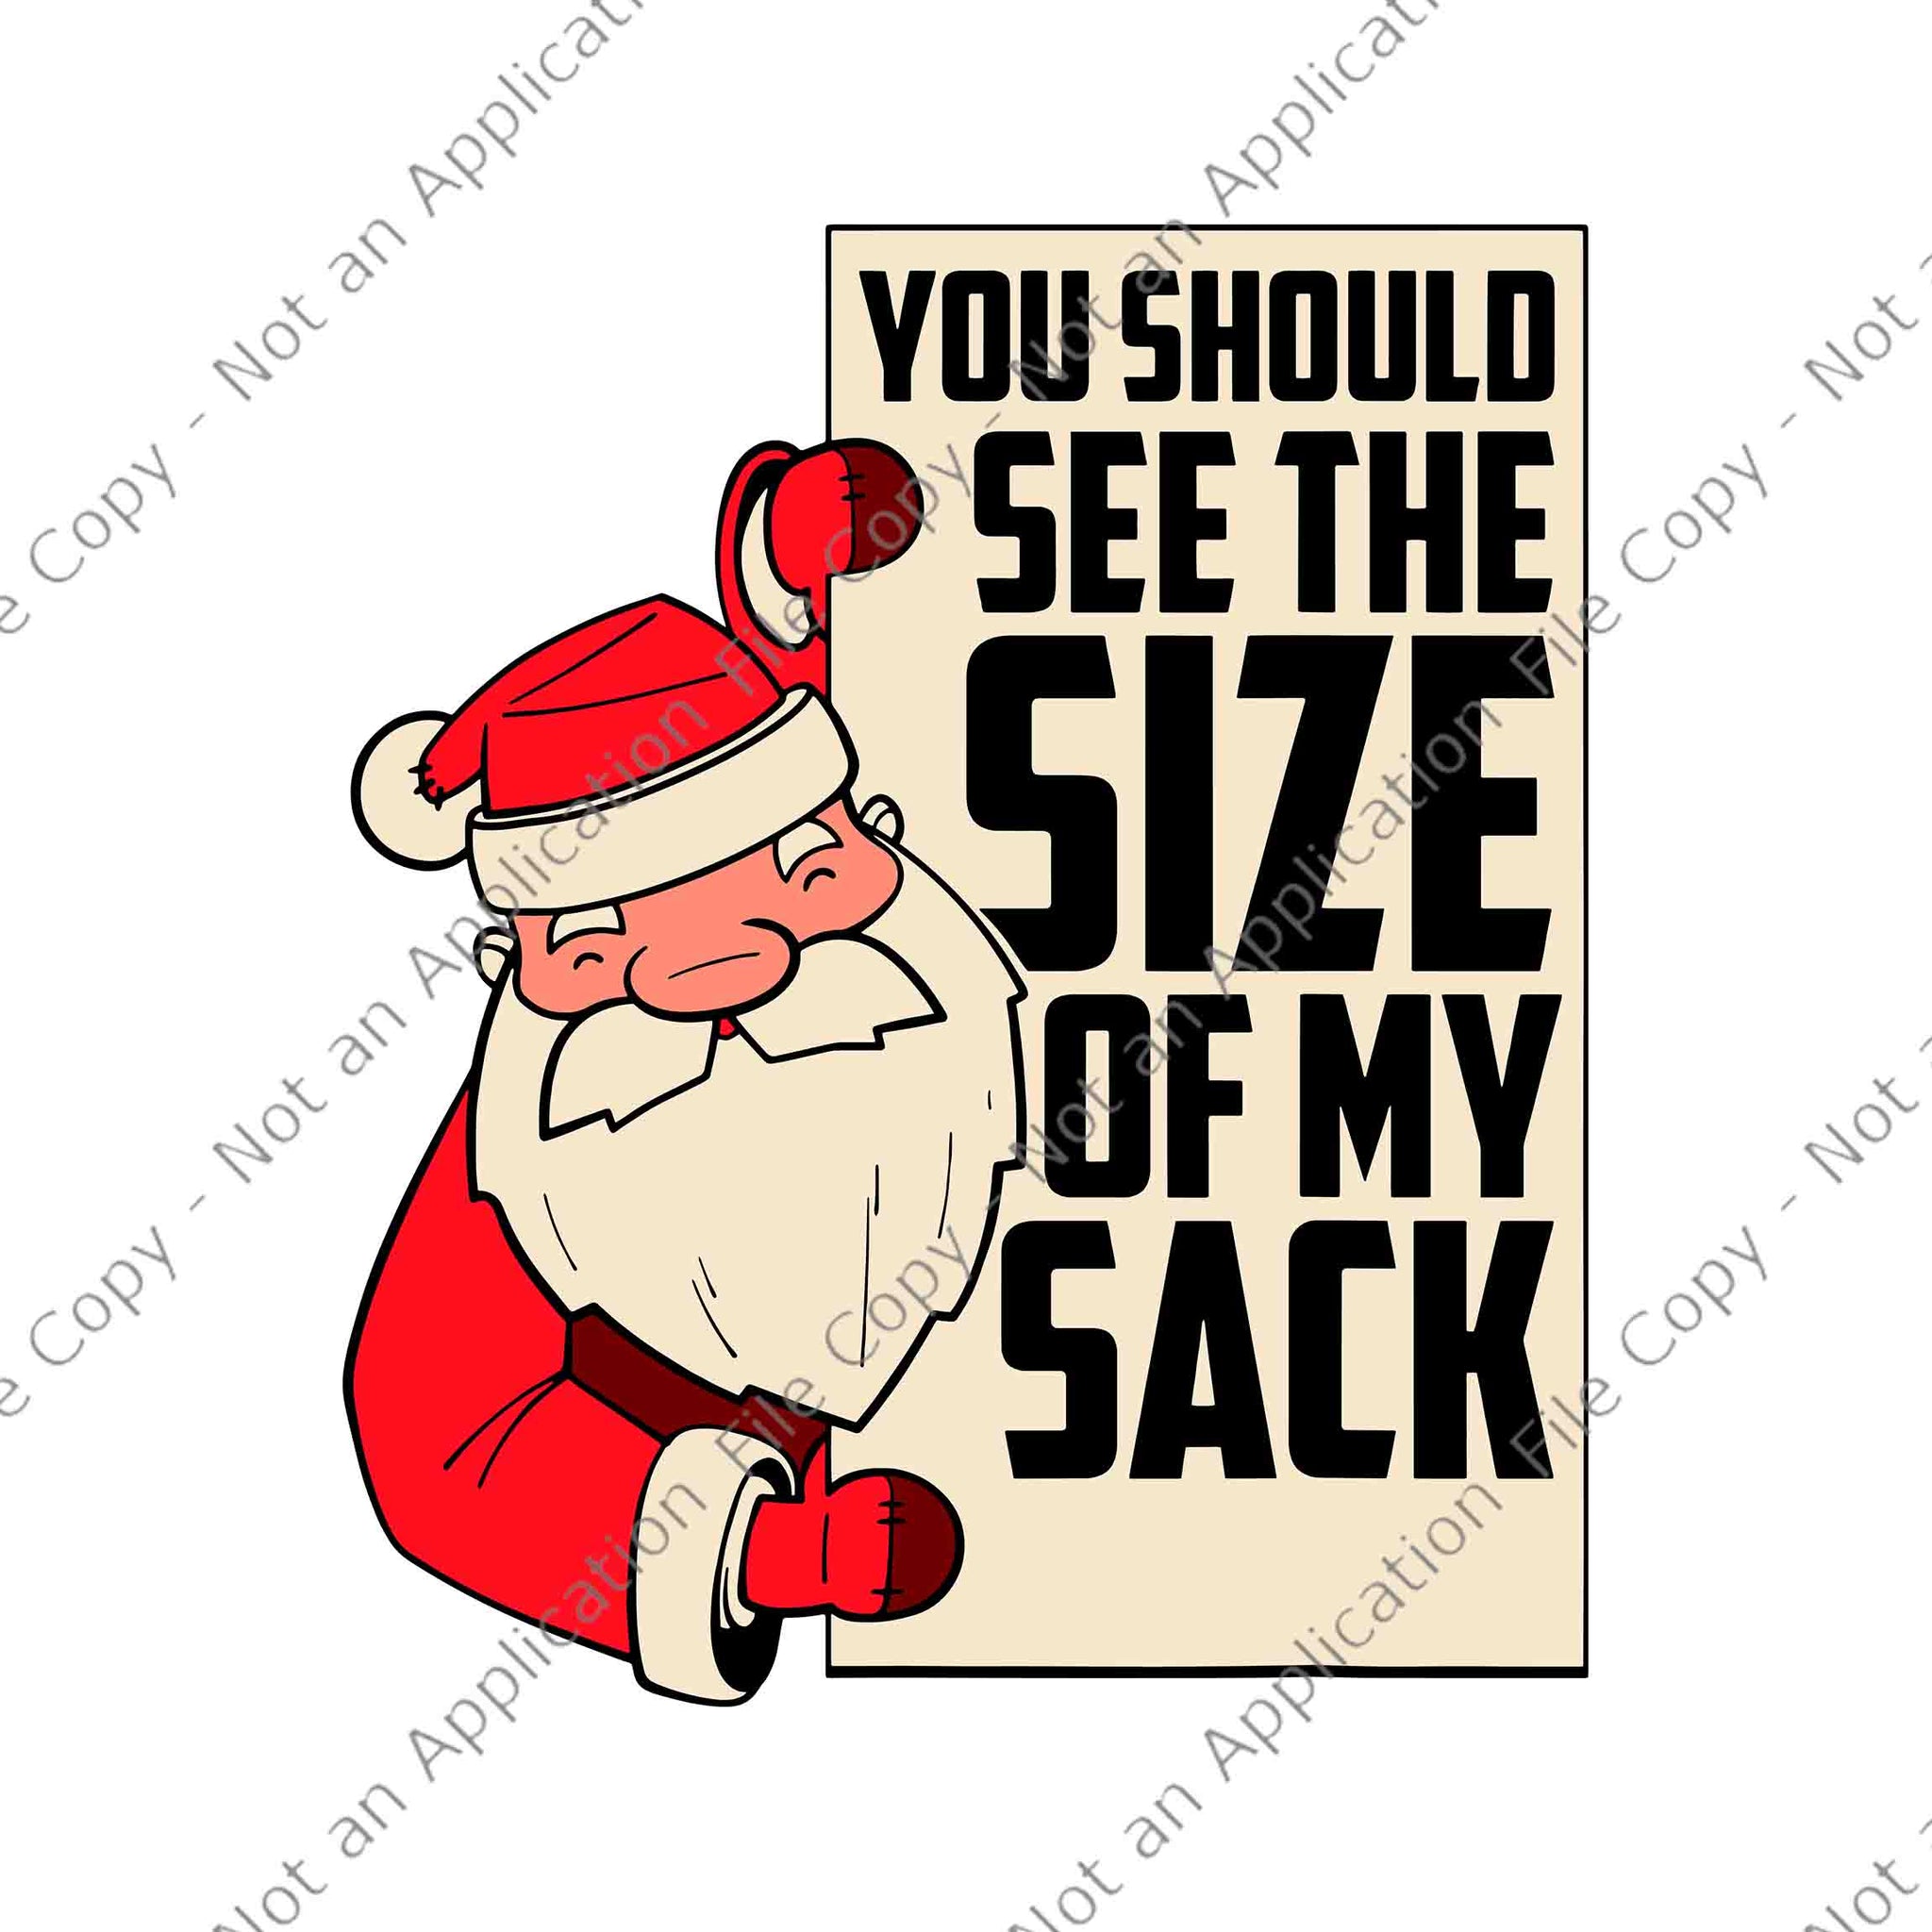 You Should See The Size Of My Sack Santa Svg, Funny Santa Christmas Svg, Santa Svg, Christmas Svg